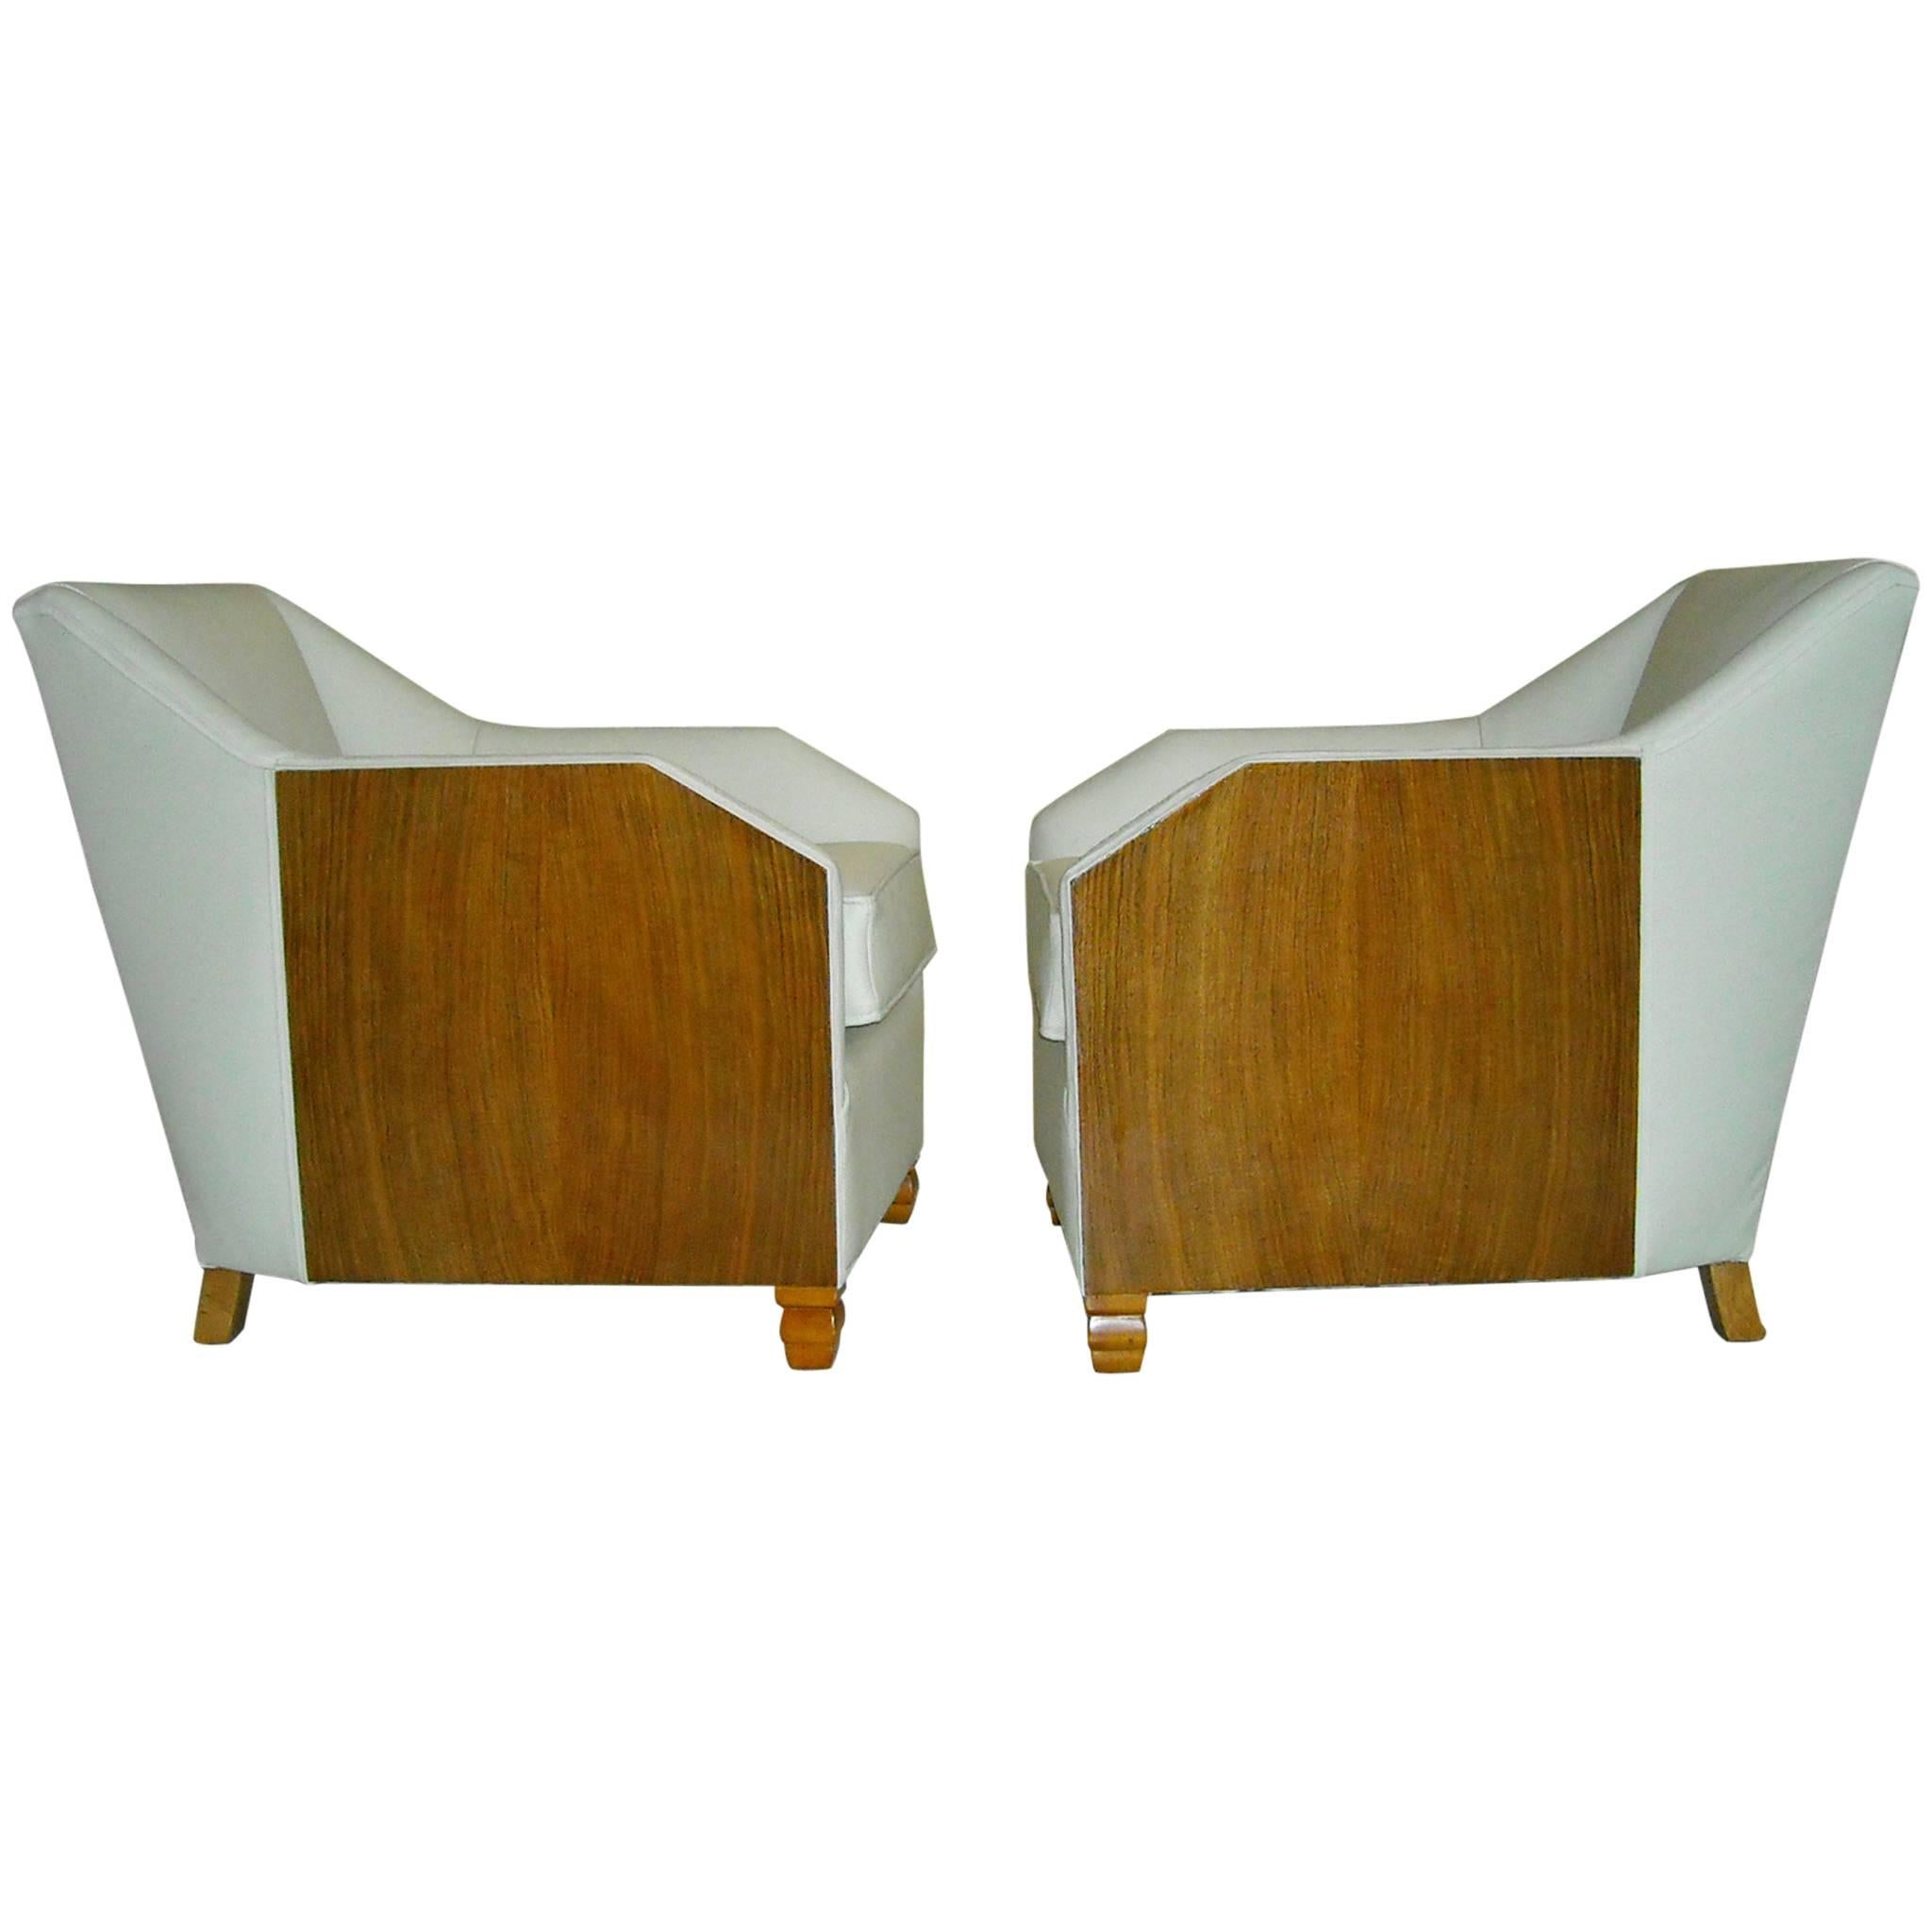 1930 Pair of Armchairs Off-White Leather and Rosewood For Sale